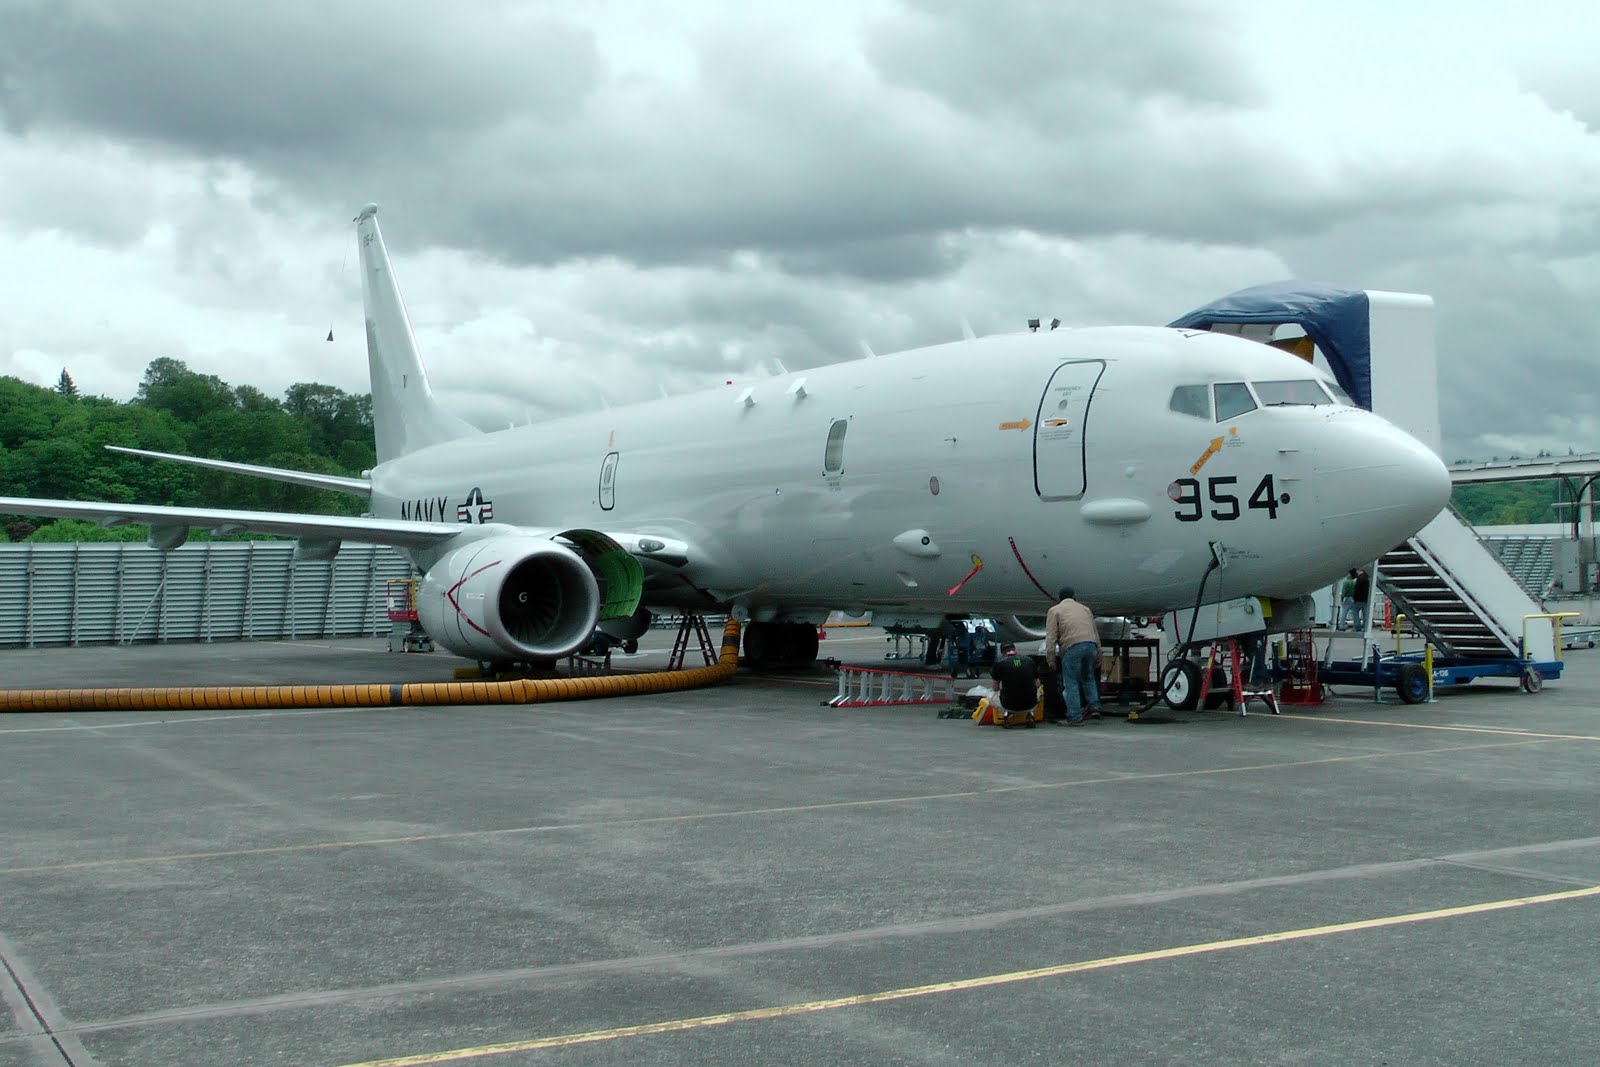 BOEING has sold the Indian Navy 8 'Poseidon P8I'; with an option to sell 16 more. BOEINGS P-8I Poseidon, (LRMR) Long Range Maritime Reconnaissance aicraft, is a derivative of B737-800 series. This is the most advanced Anti-submarine aircraft being developed with latest Active Electronic Steered Array (AESA) radar & electronic warfare systems aboard. This aircraft is a feather in the cap for the Indian Navy !! 